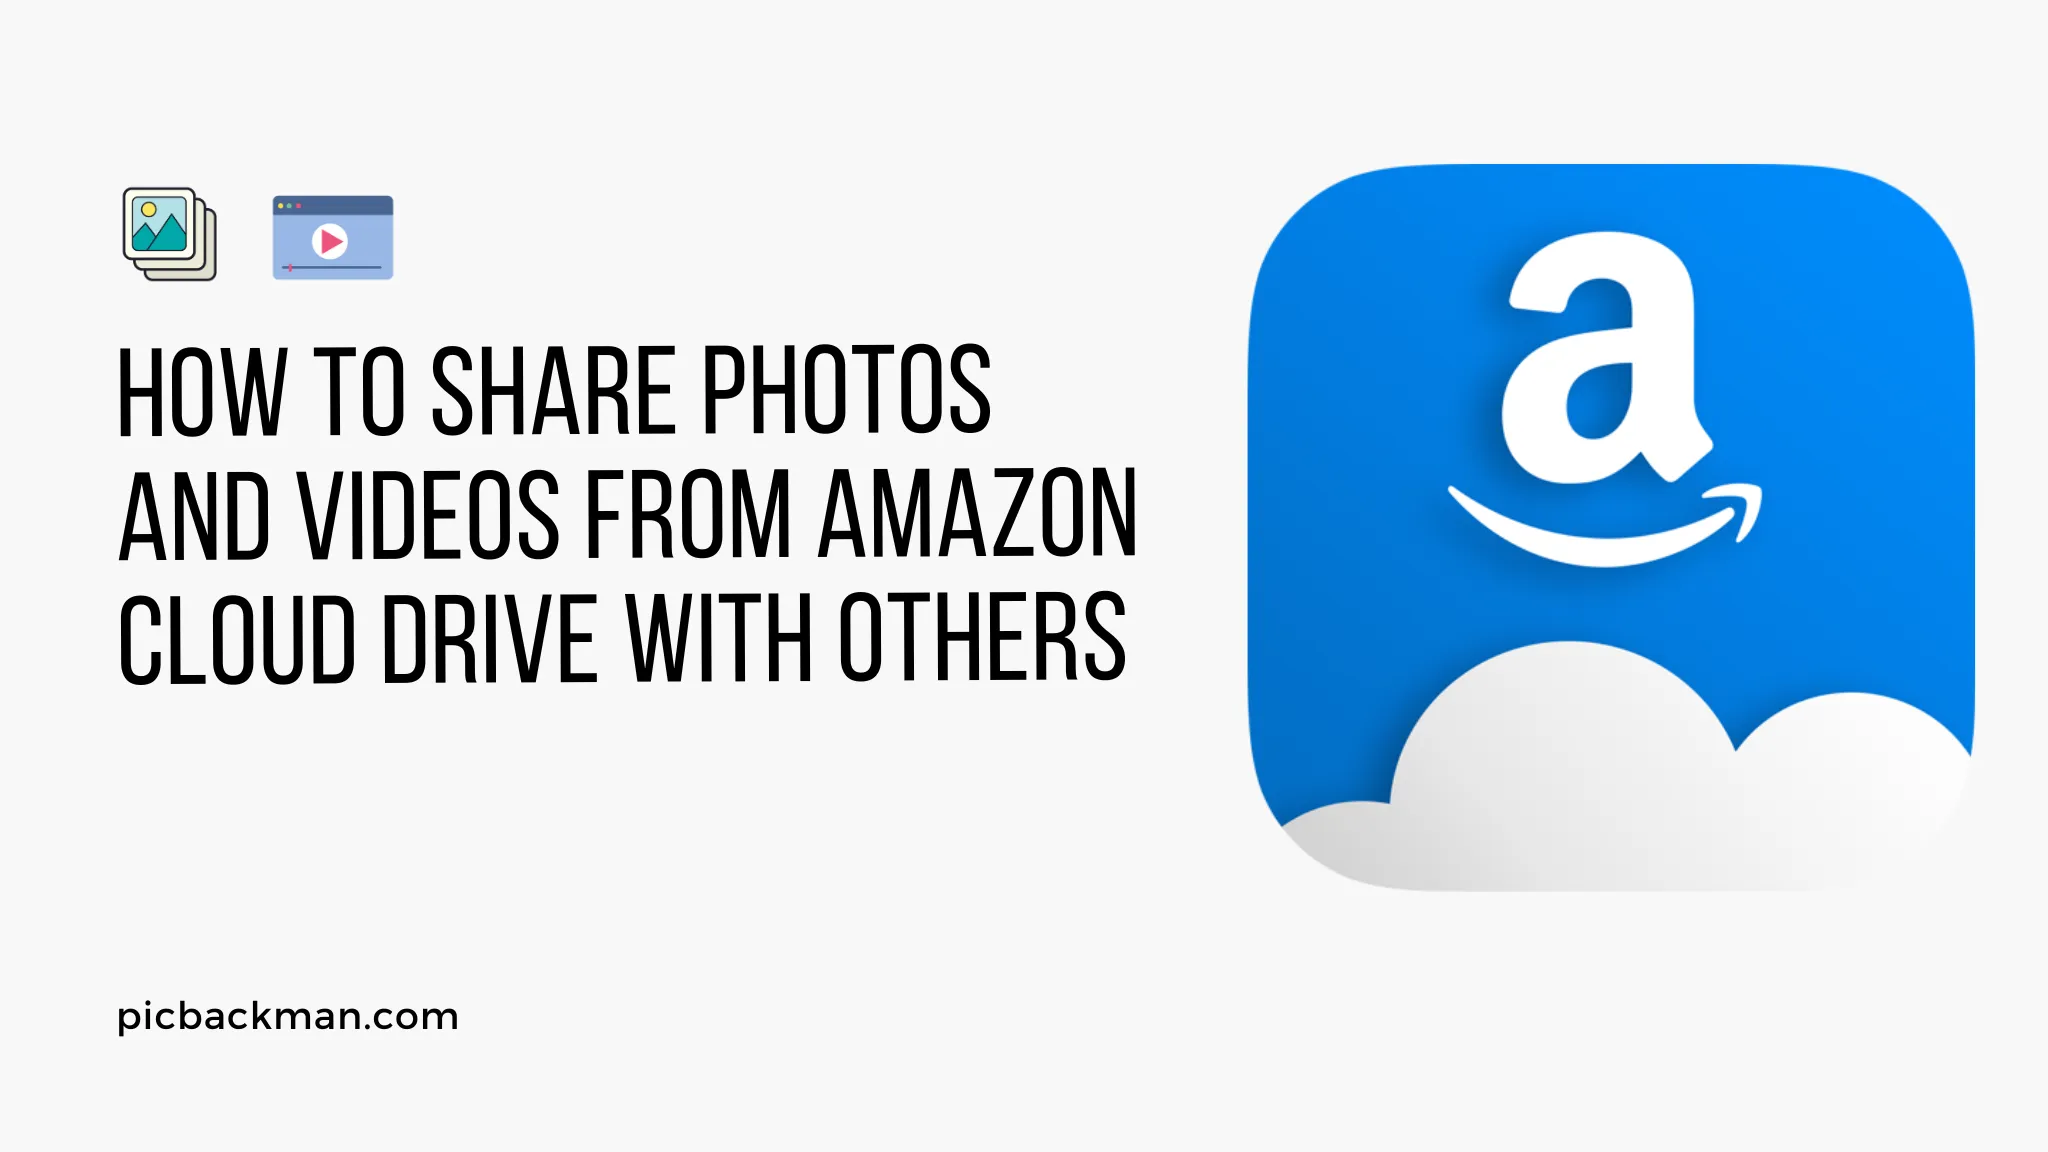 How to Share Photos and Videos from Amazon Cloud Drive with Others?